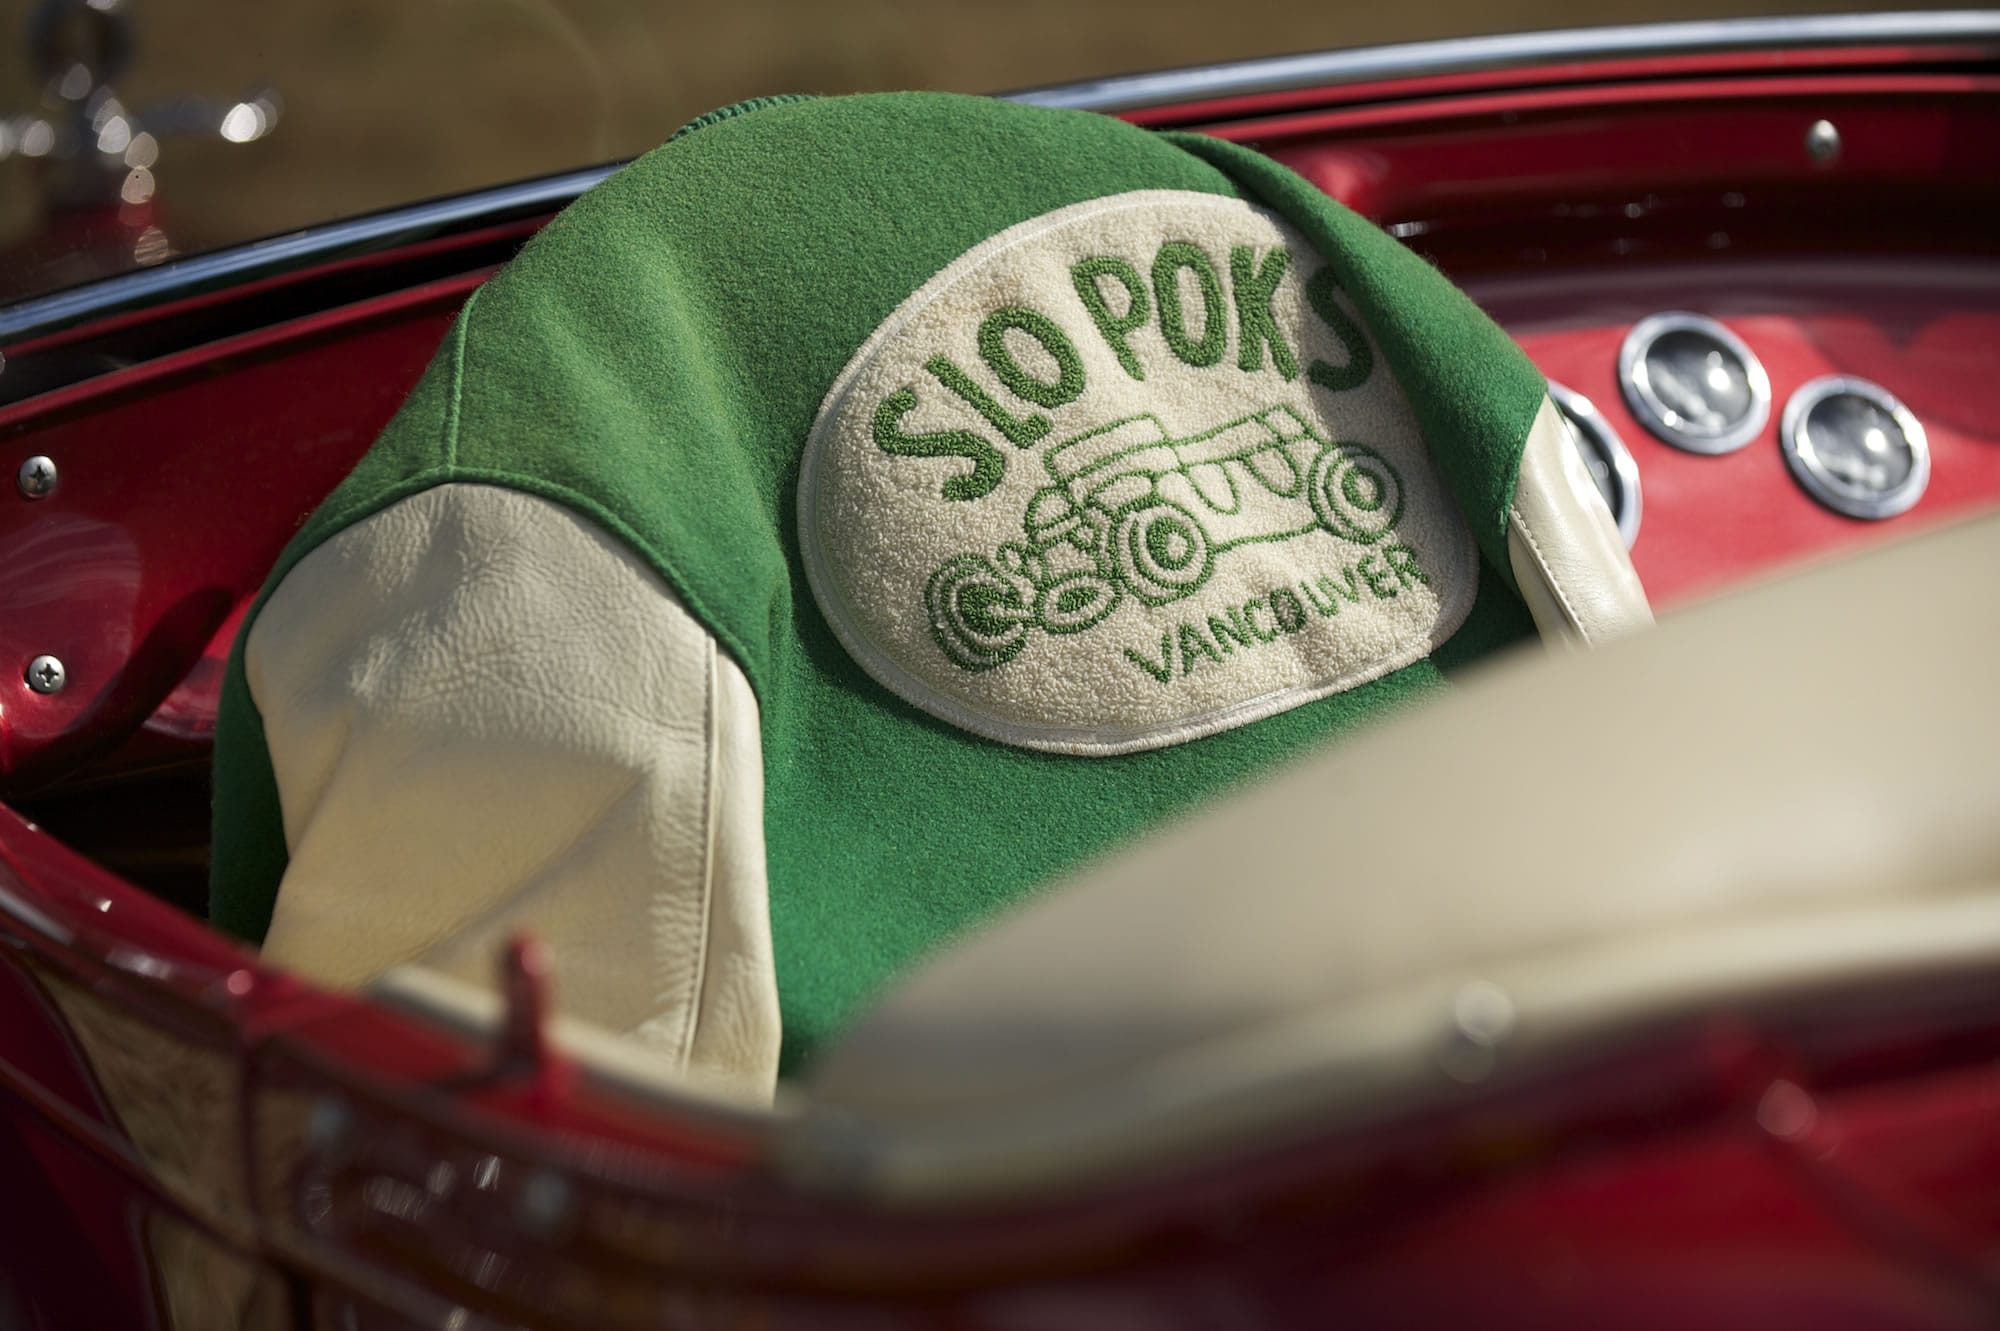 The Slo Poks emblem was created in 1952 by Roger Porter, still a member of the club.